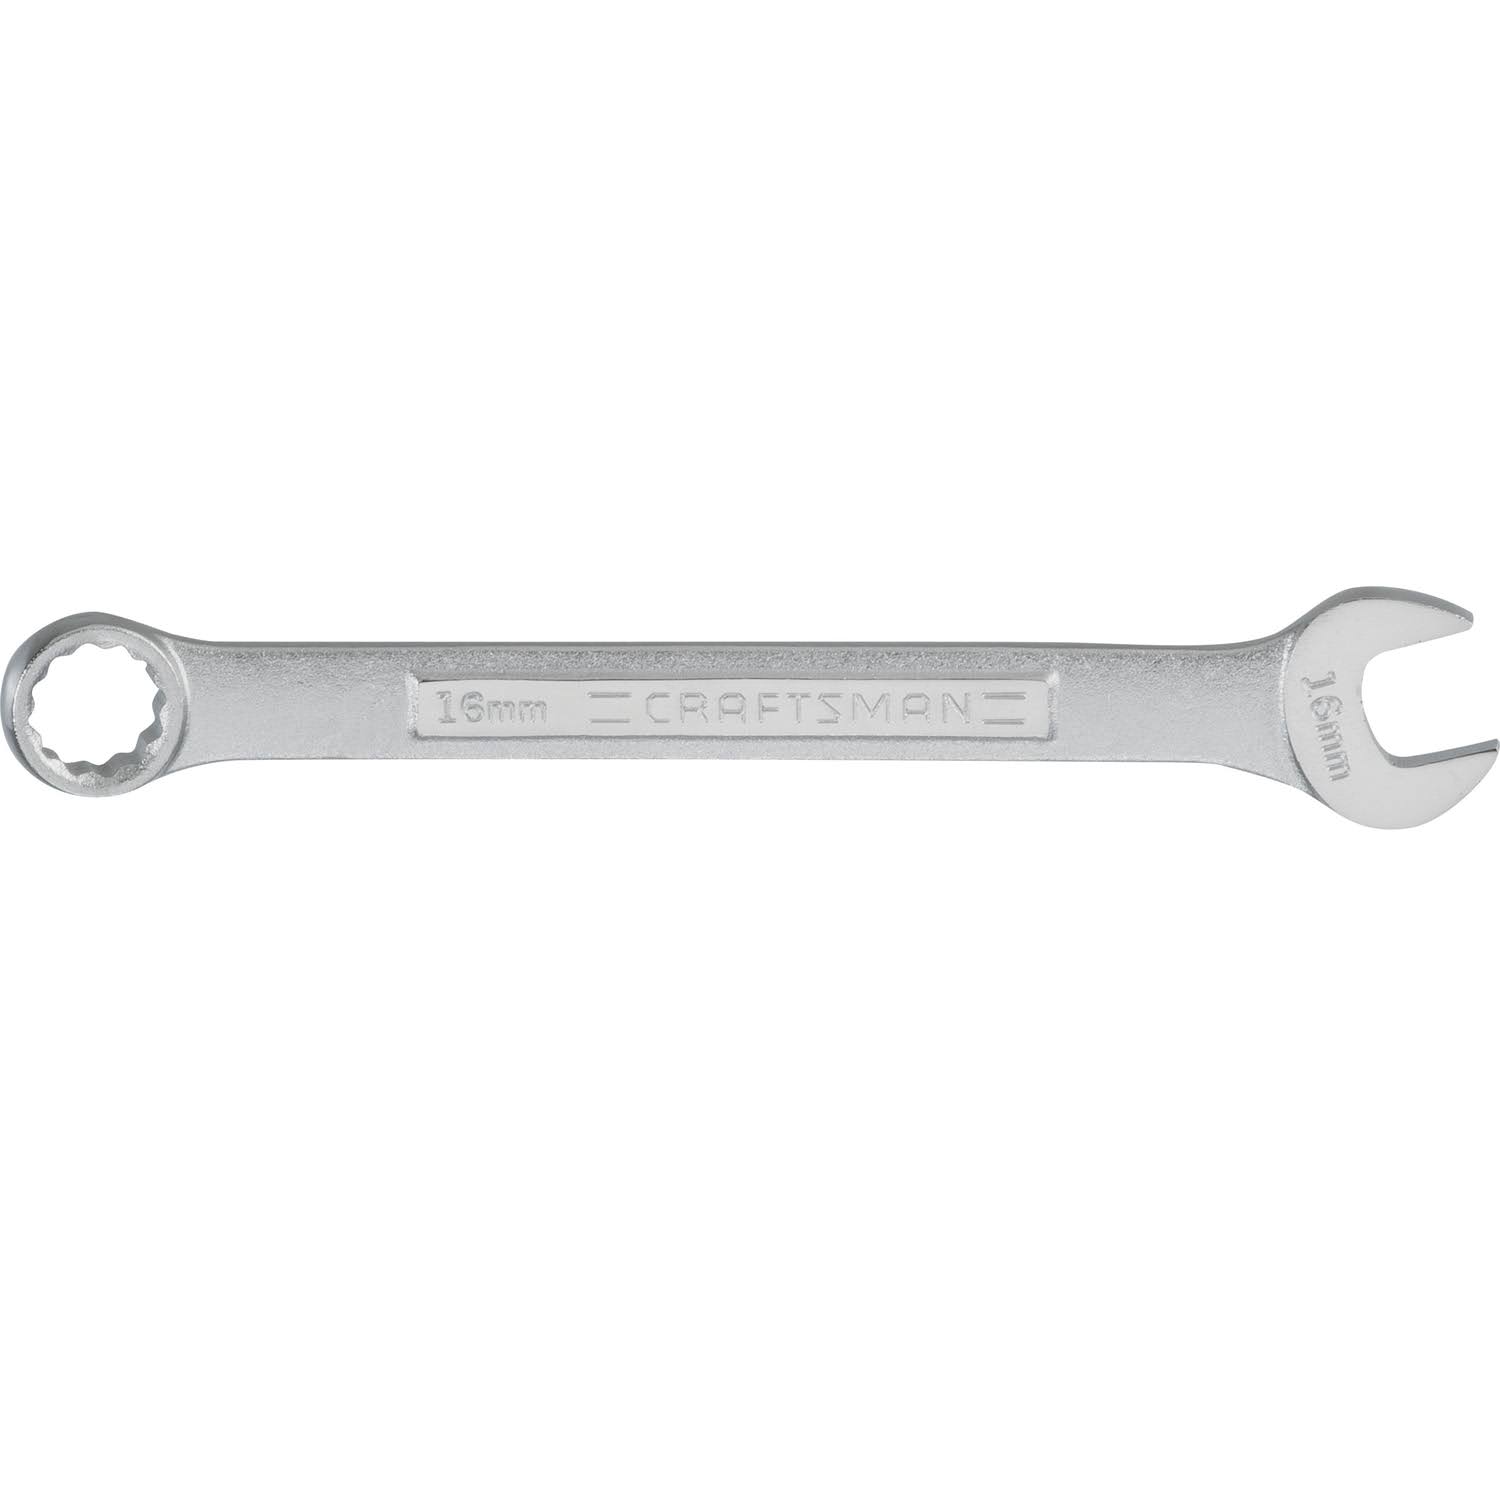 Craftsman Cmmt42924 12 Point Metric Combination Wrench, 16mm